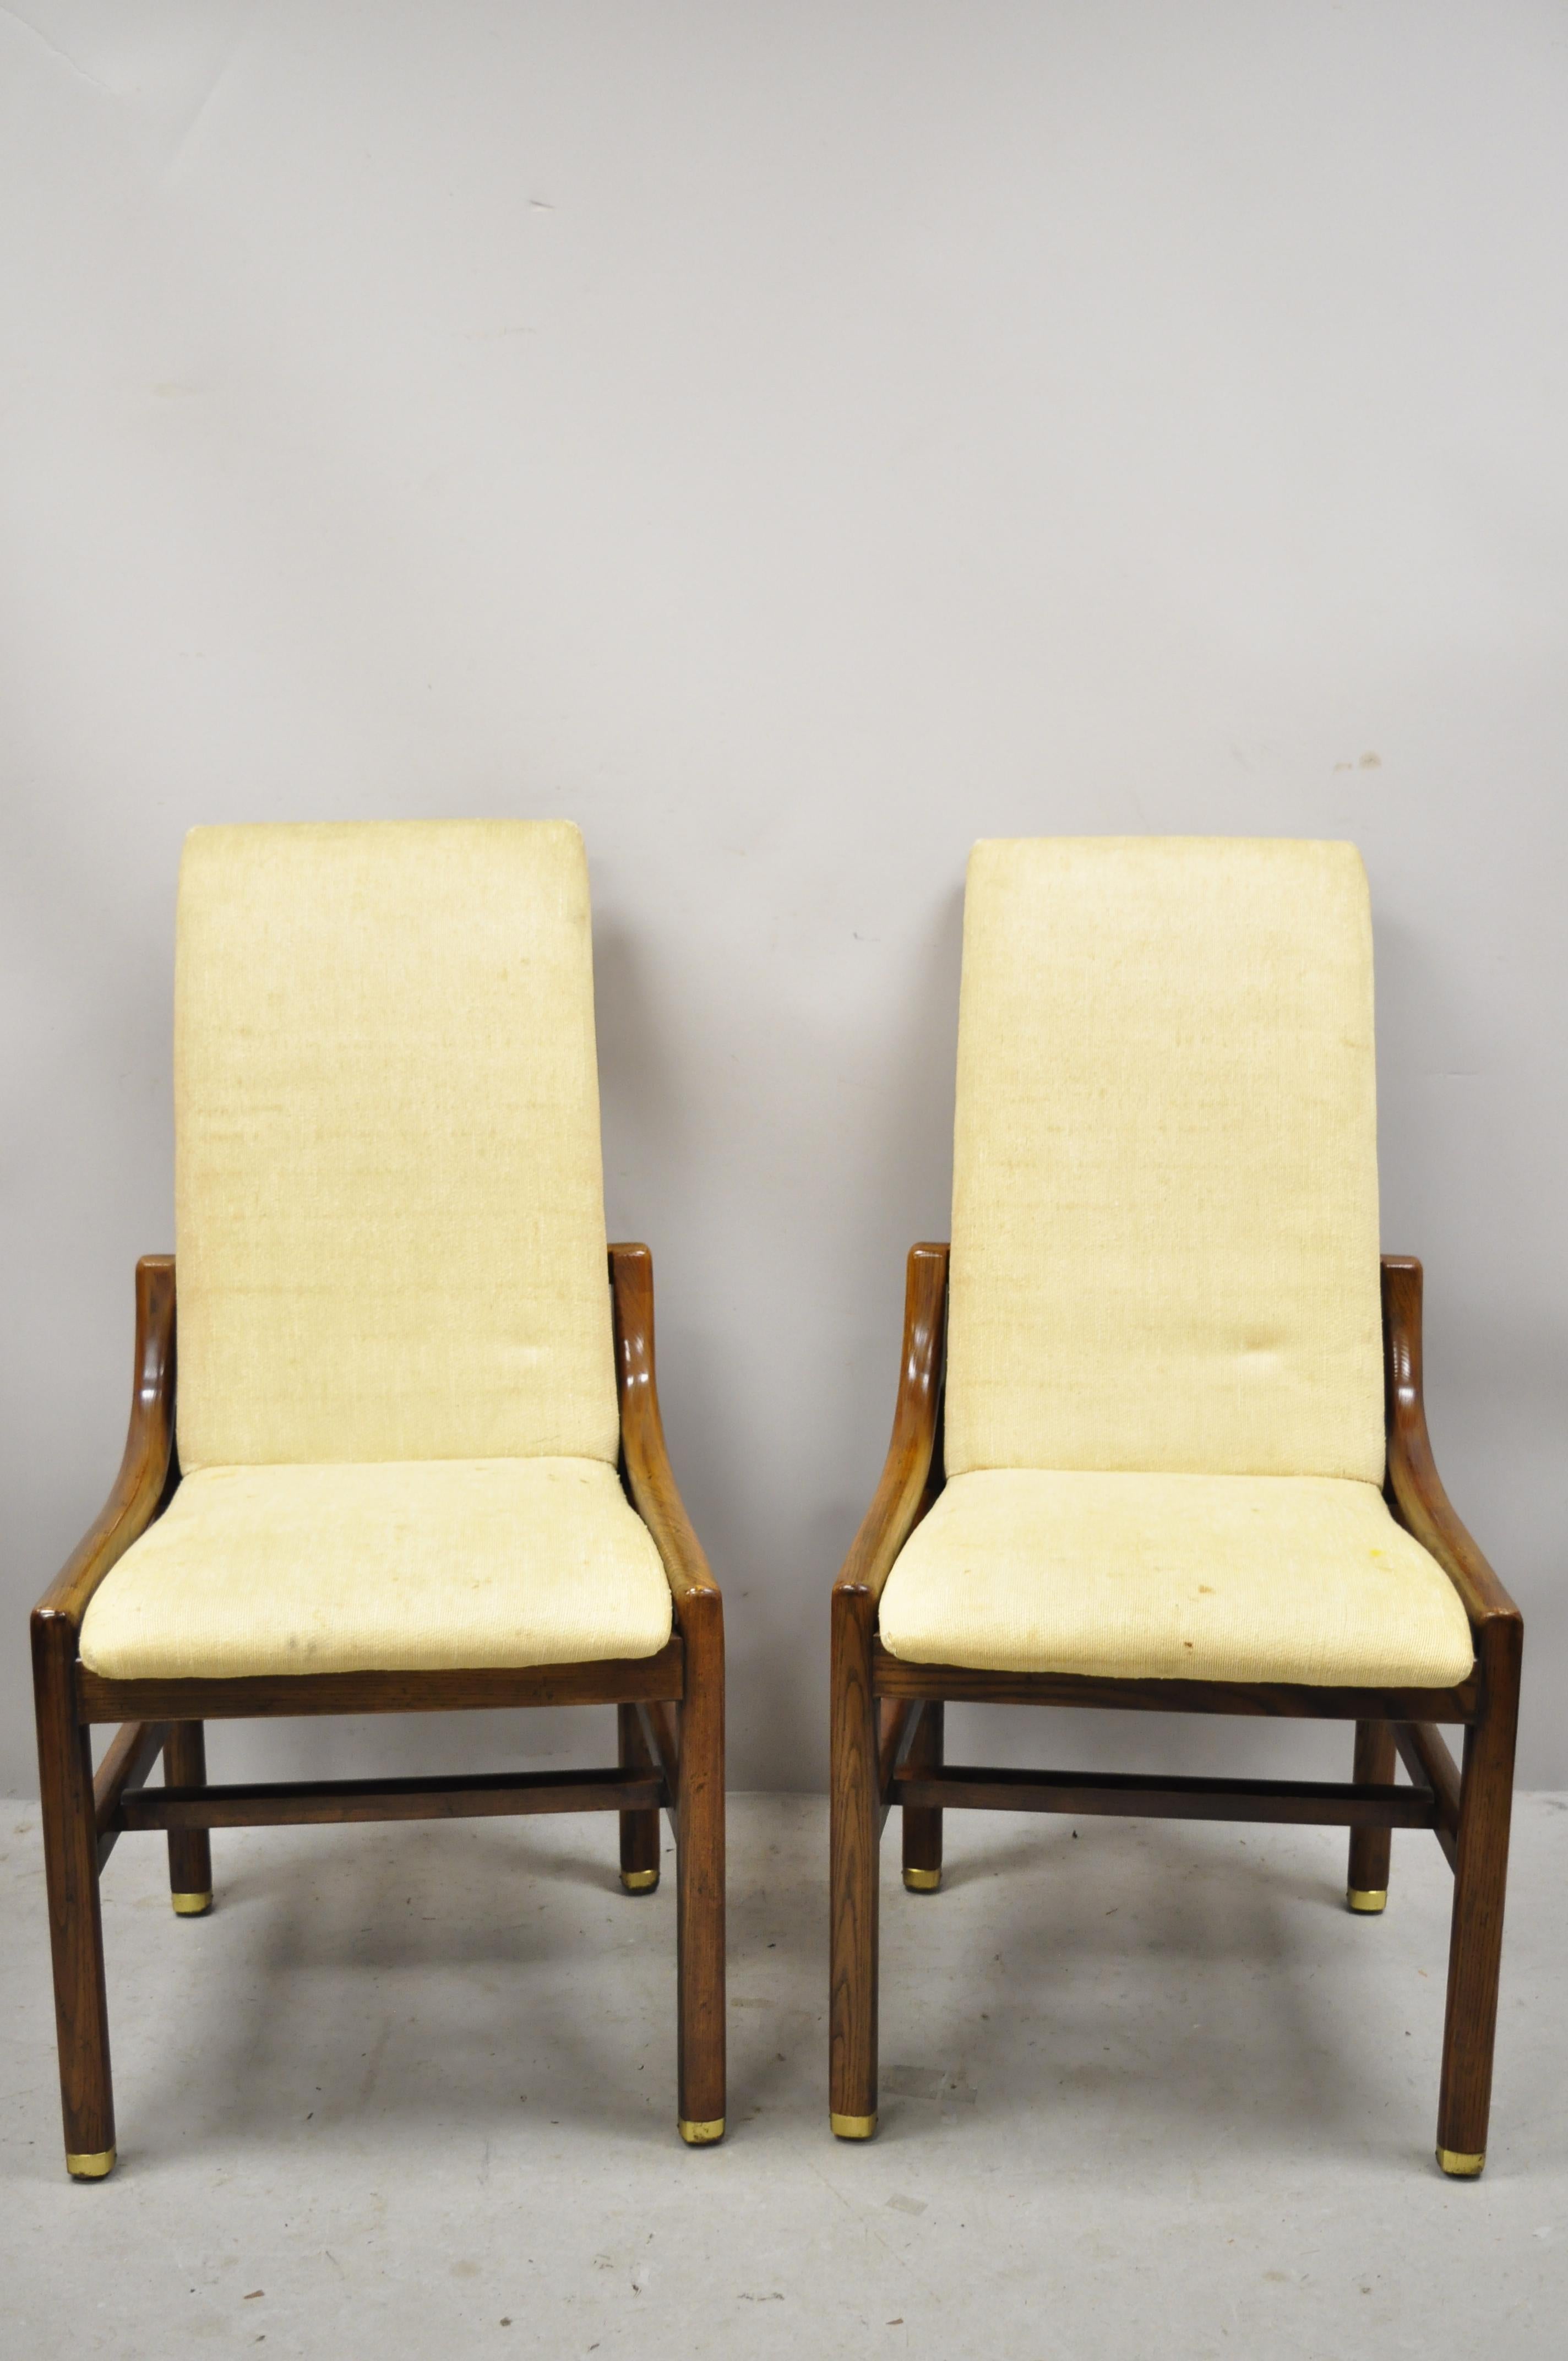 Henredon Mid-Century Modern oakwood and brass modern dining side chairs - a pair. Item features solid wood frame, beautiful wood grain, original label, clean modernist lines, sleek sculptural form, circa mid-late 20th century. Measurements: 39.5